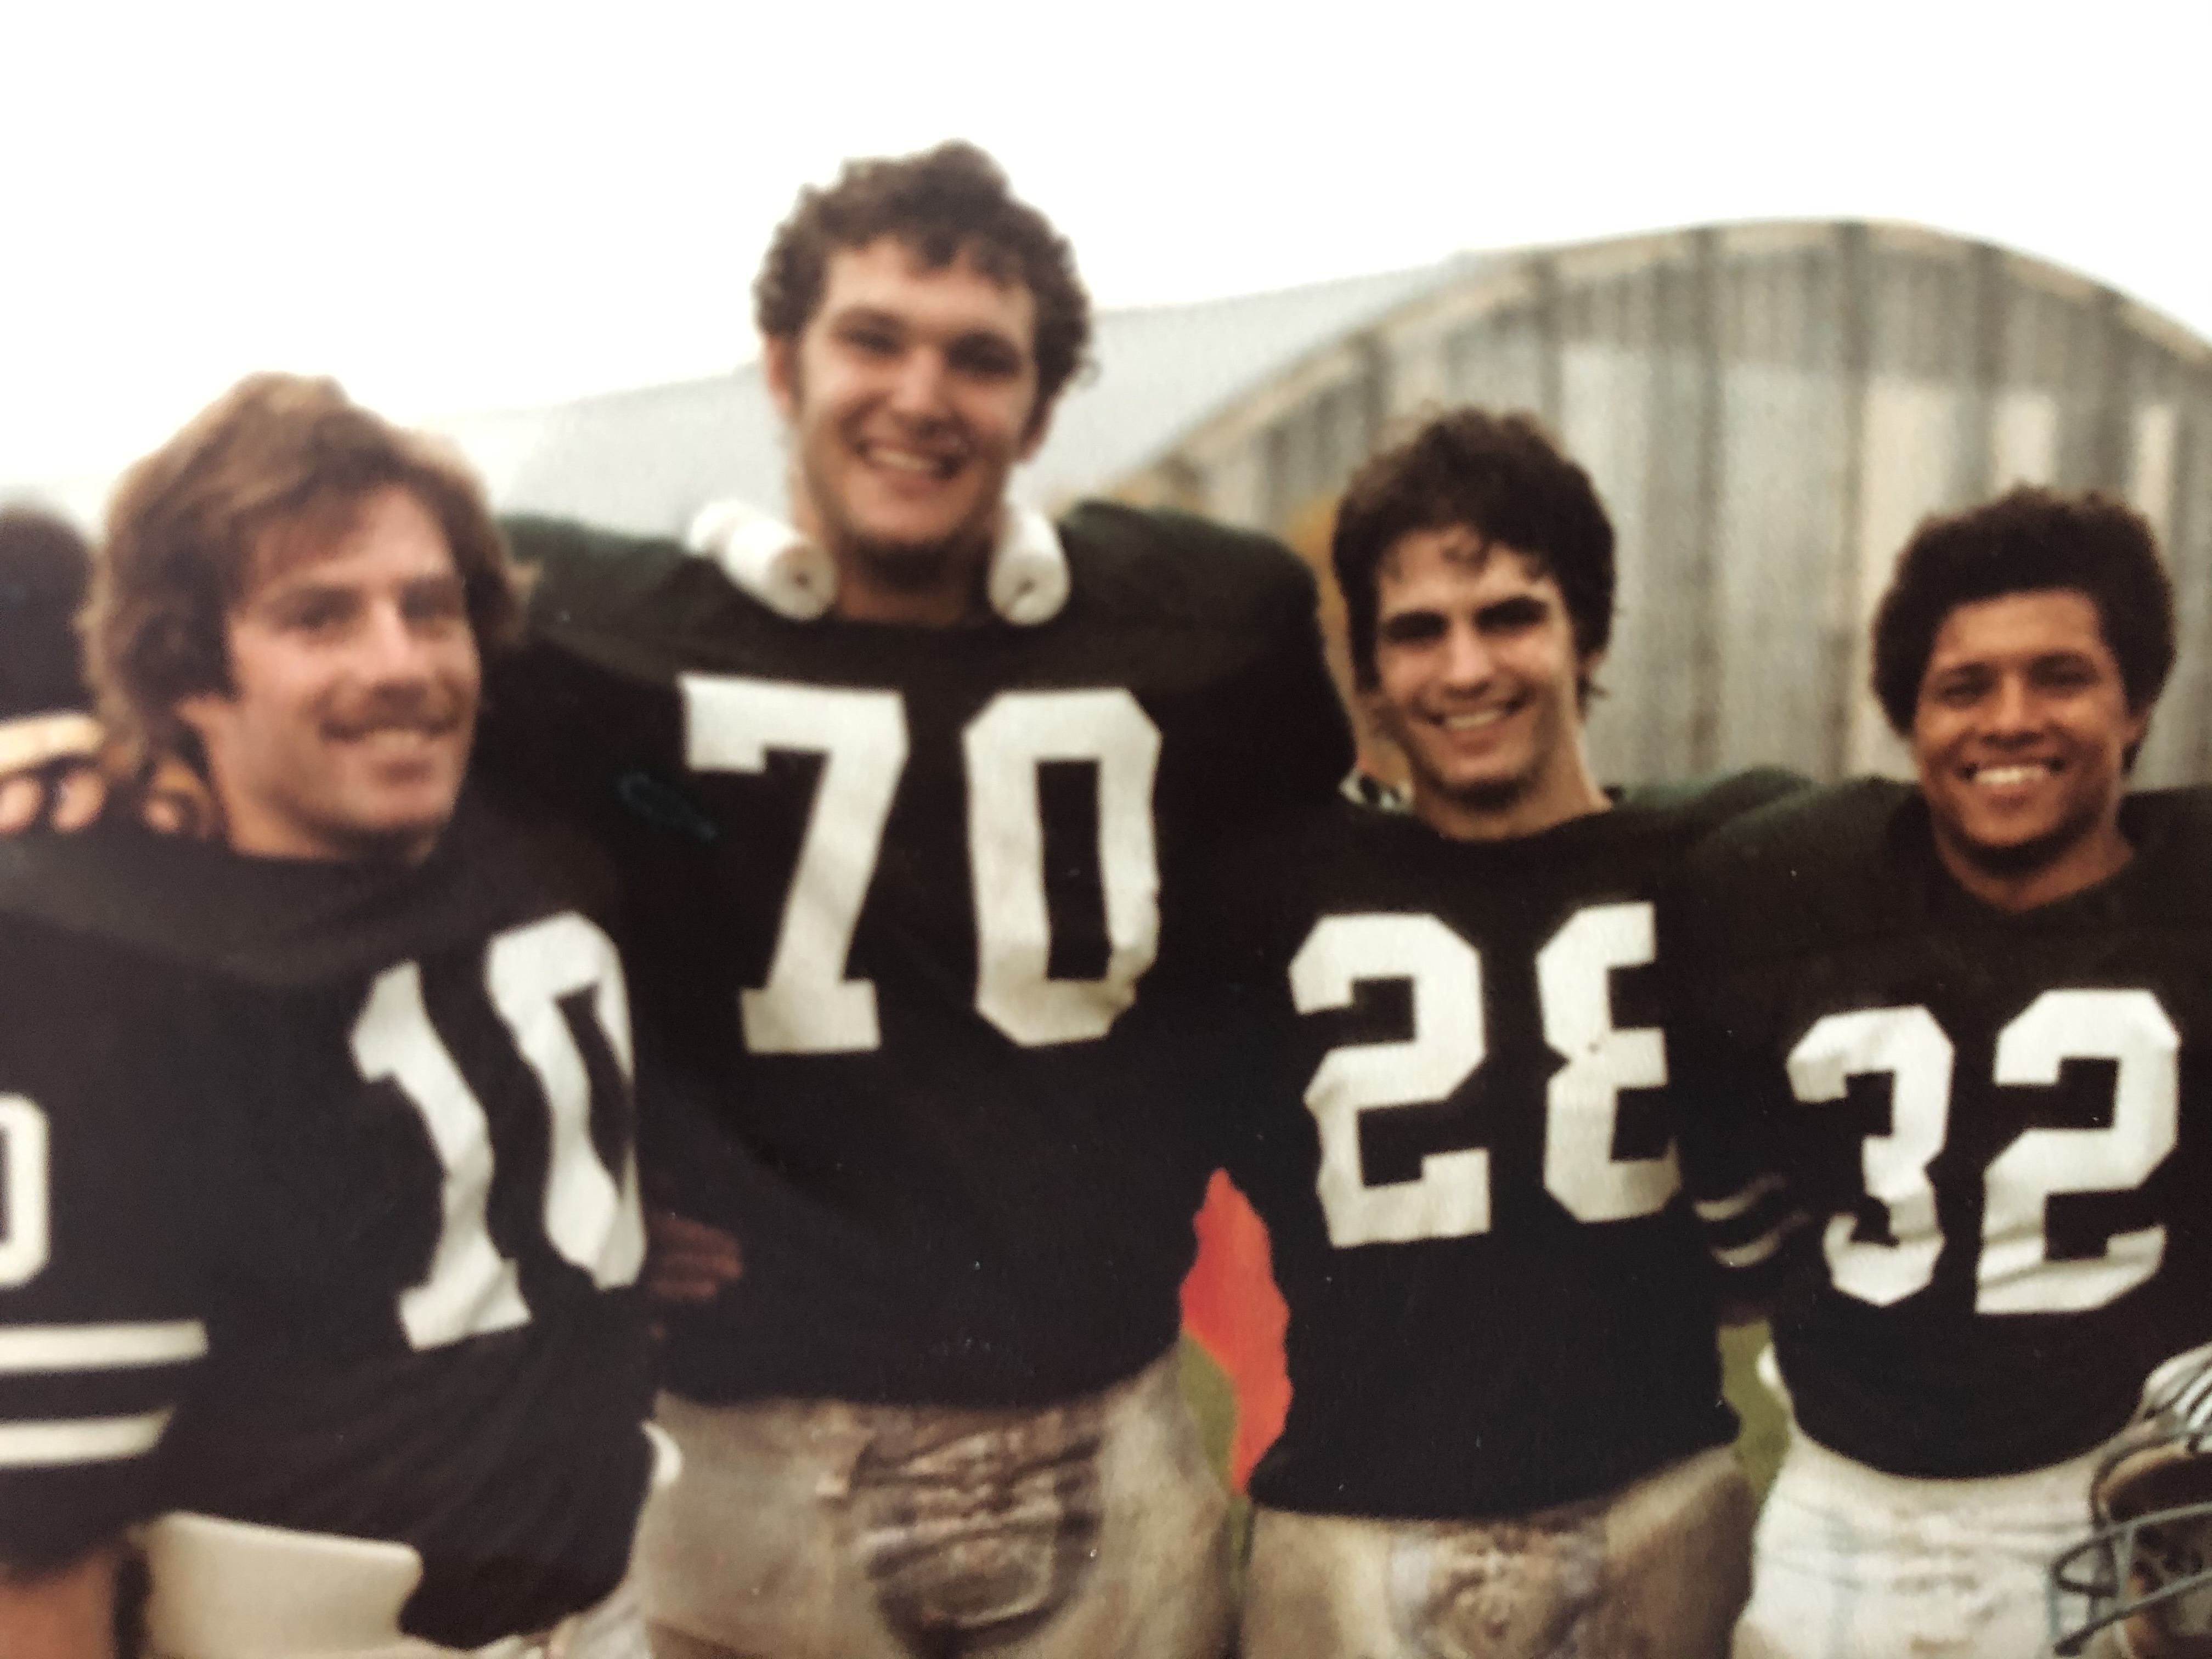 Bob Higgins with teammates (from left) Andrew Chodos, James Rill, and Jeff Dufresne 